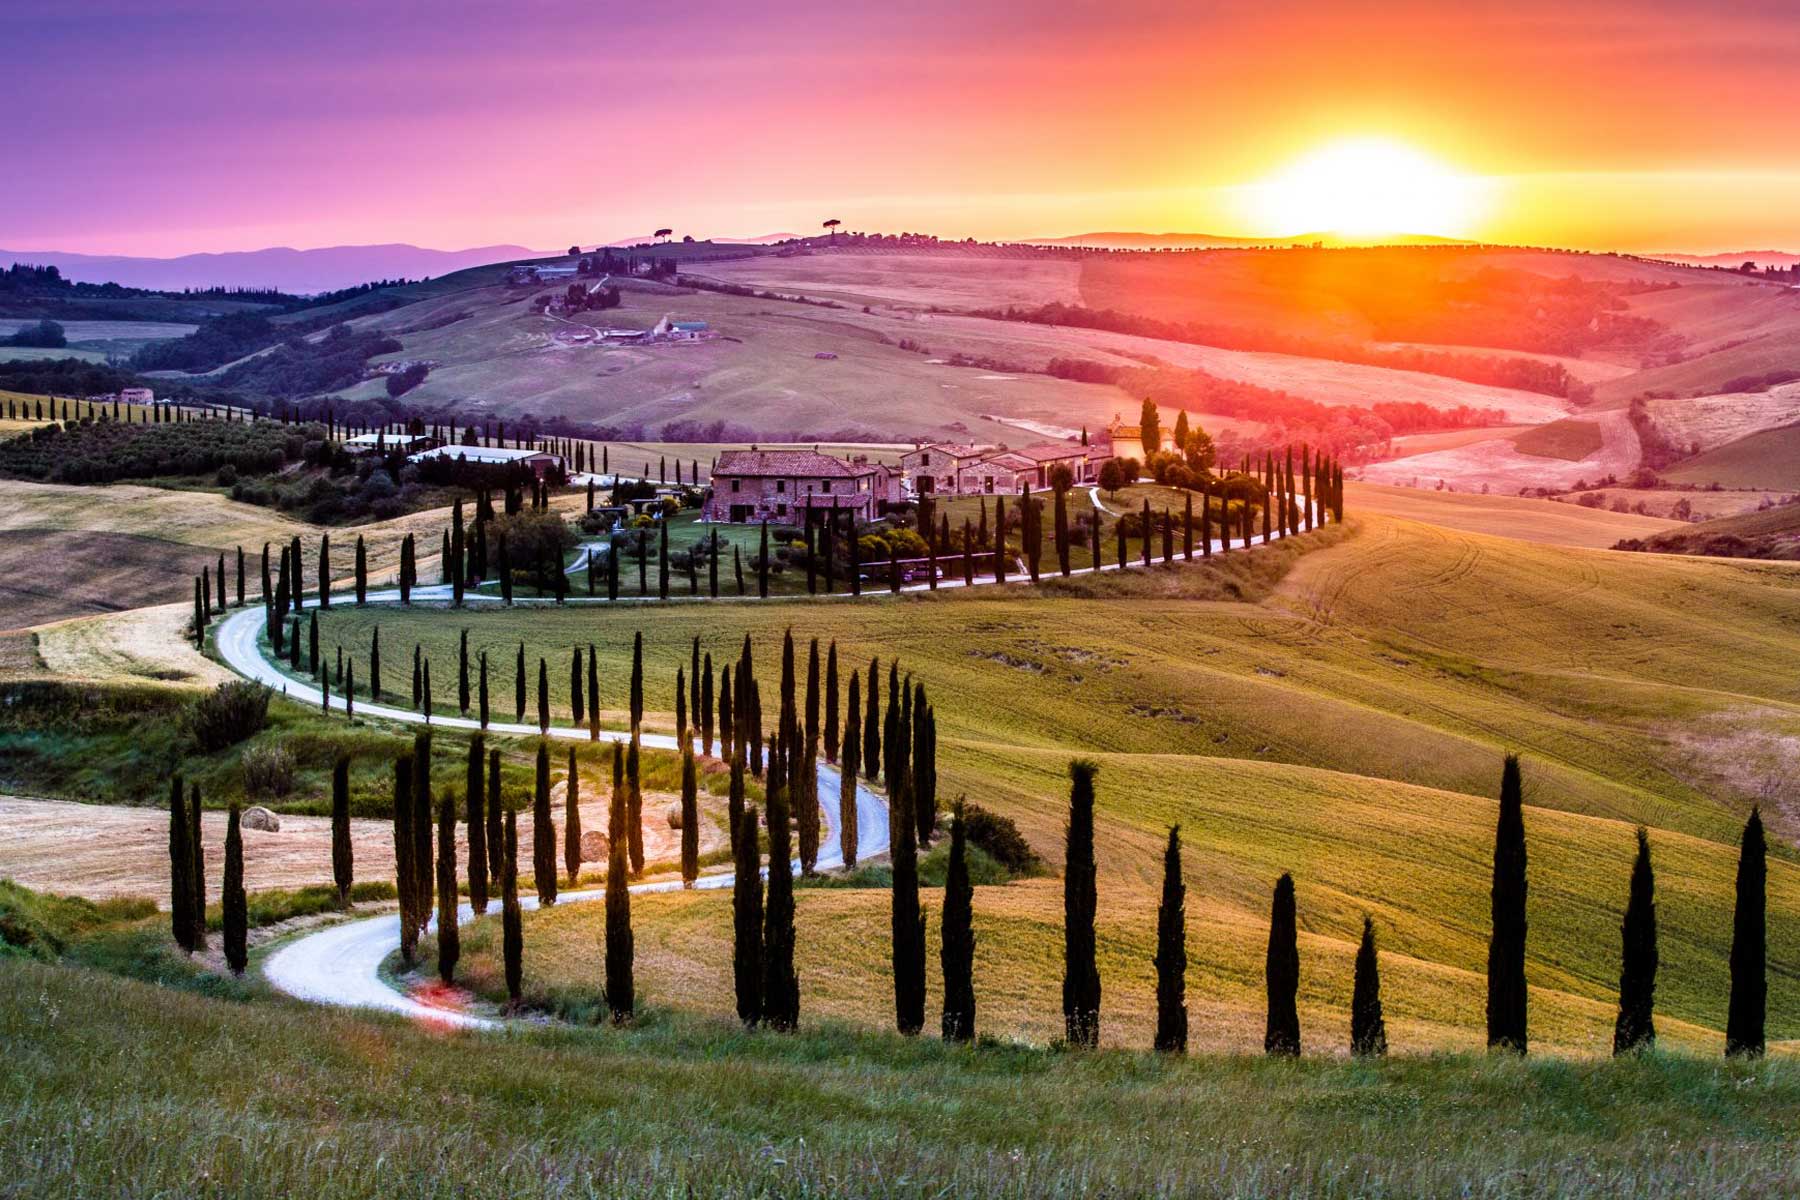 rome to tuscany travel time